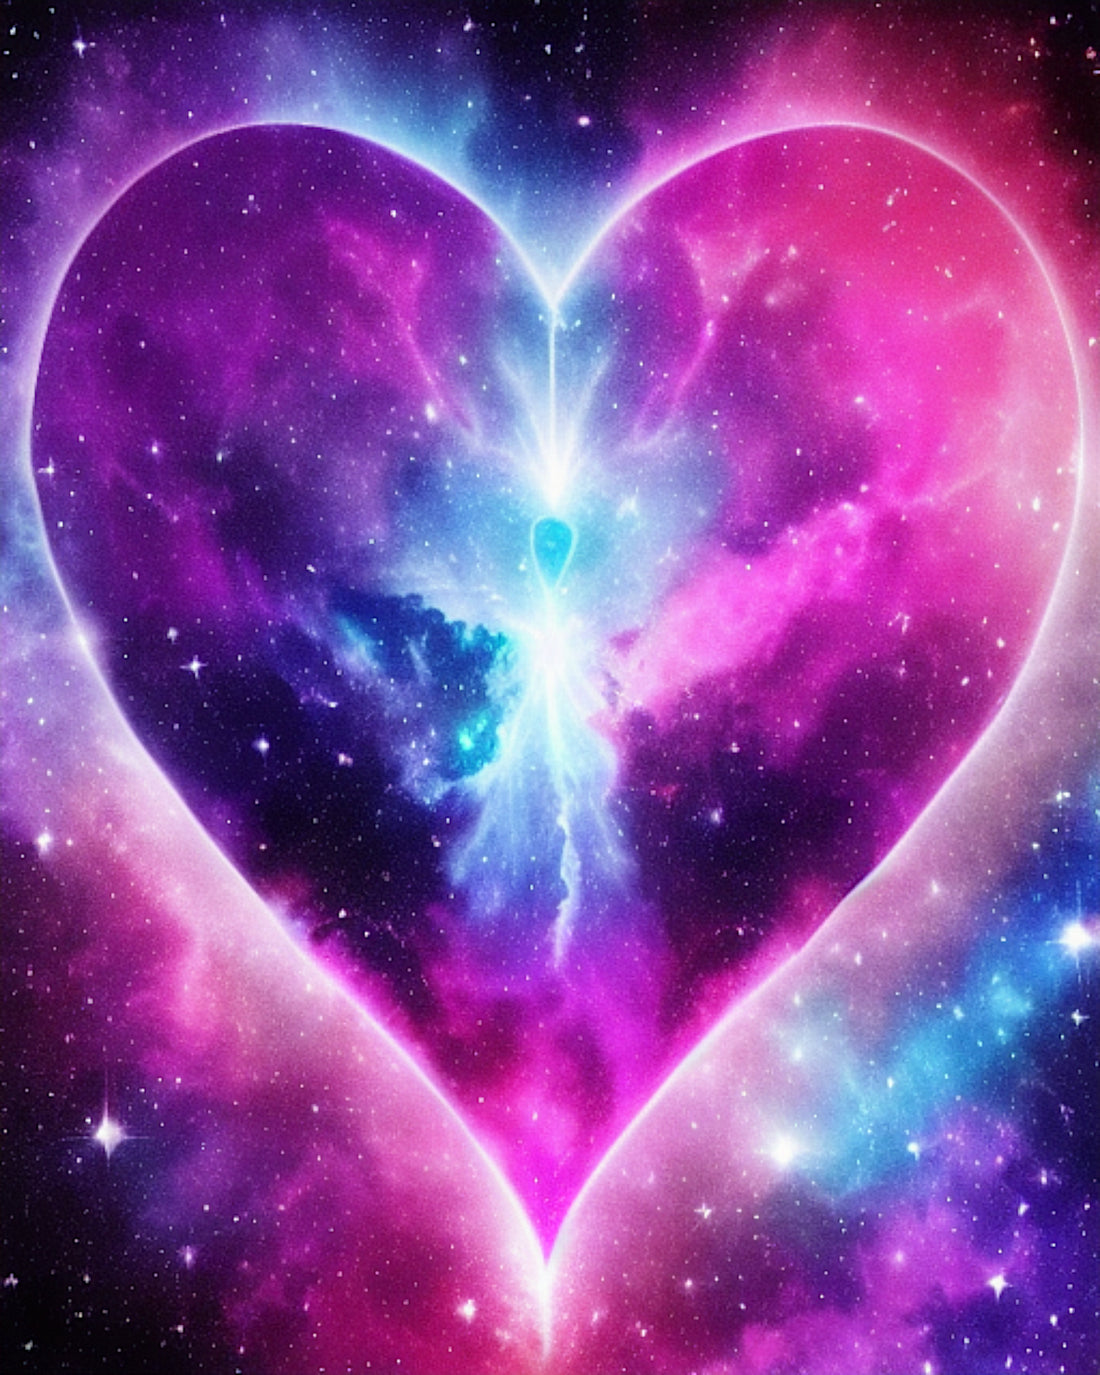 Rediscovering Divine Love: Reconnecting with a Lost Spiritual Practice in a Fast-Paced World - The Nebula Palace - Heart made from the cosmos to represent divine love